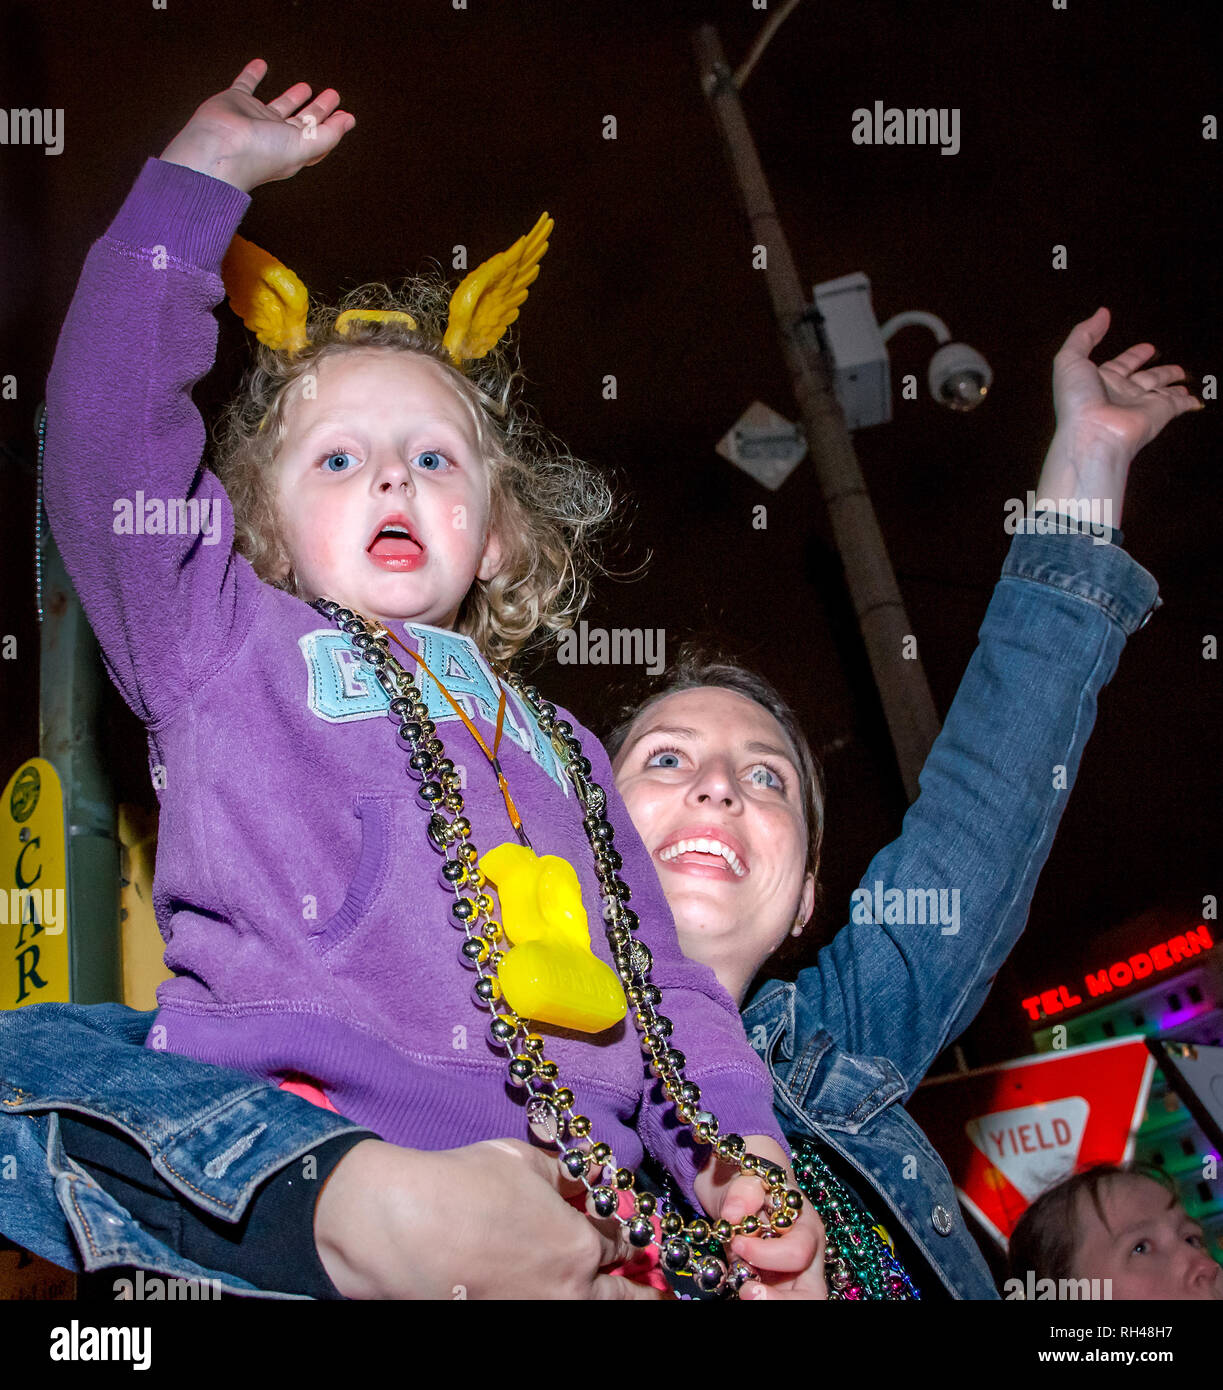 A mother and daughter wave for beads during the Krewe of Hermes Mardi Gras parade, Feb. 28, 2014, in New Orleans, Louisiana. Stock Photo